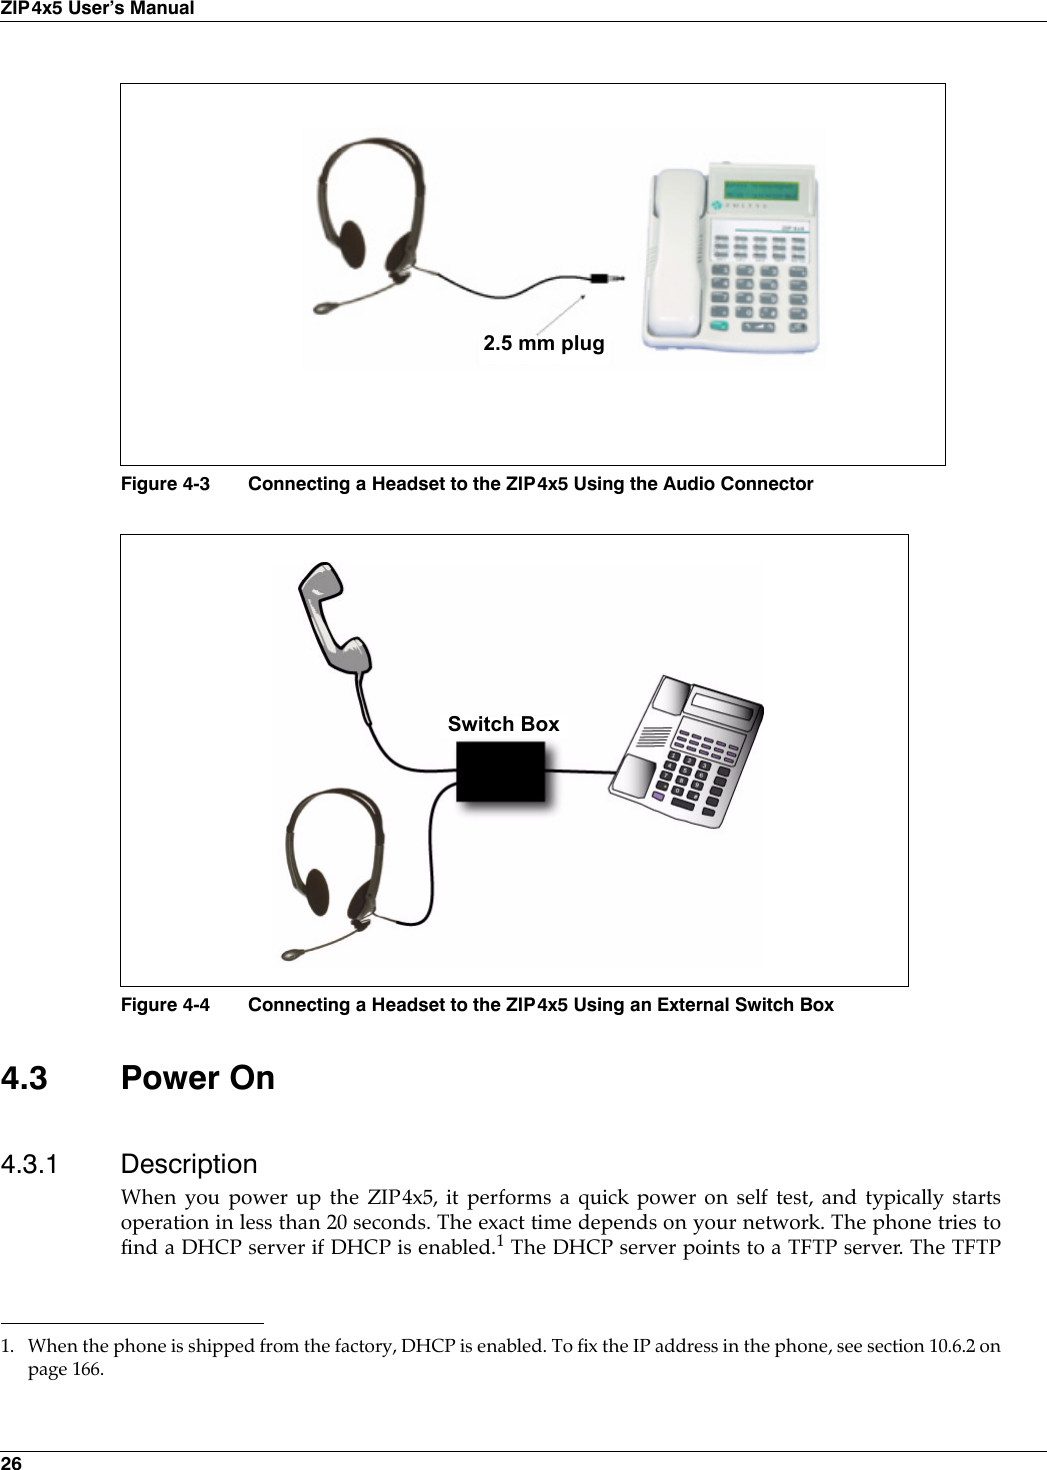 26ZIP4x5 User’s Manual4.3 Power On4.3.1 DescriptionWhen you power up the ZIP4x5, it performs a quick power on self test, and typically startsoperation in less than 20 seconds. The exact time depends on your network. The phone tries tofind a DHCP server if DHCP is enabled.1 The DHCP server points to a TFTP server. The TFTPFigure 4-3 Connecting a Headset to the ZIP4x5 Using the Audio ConnectorFigure 4-4 Connecting a Headset to the ZIP4x5 Using an External Switch Box1. When the phone is shipped from the factory, DHCP is enabled. To fix the IP address in the phone, see section 10.6.2 onpage 166.2.5 mm plugSwitch Box